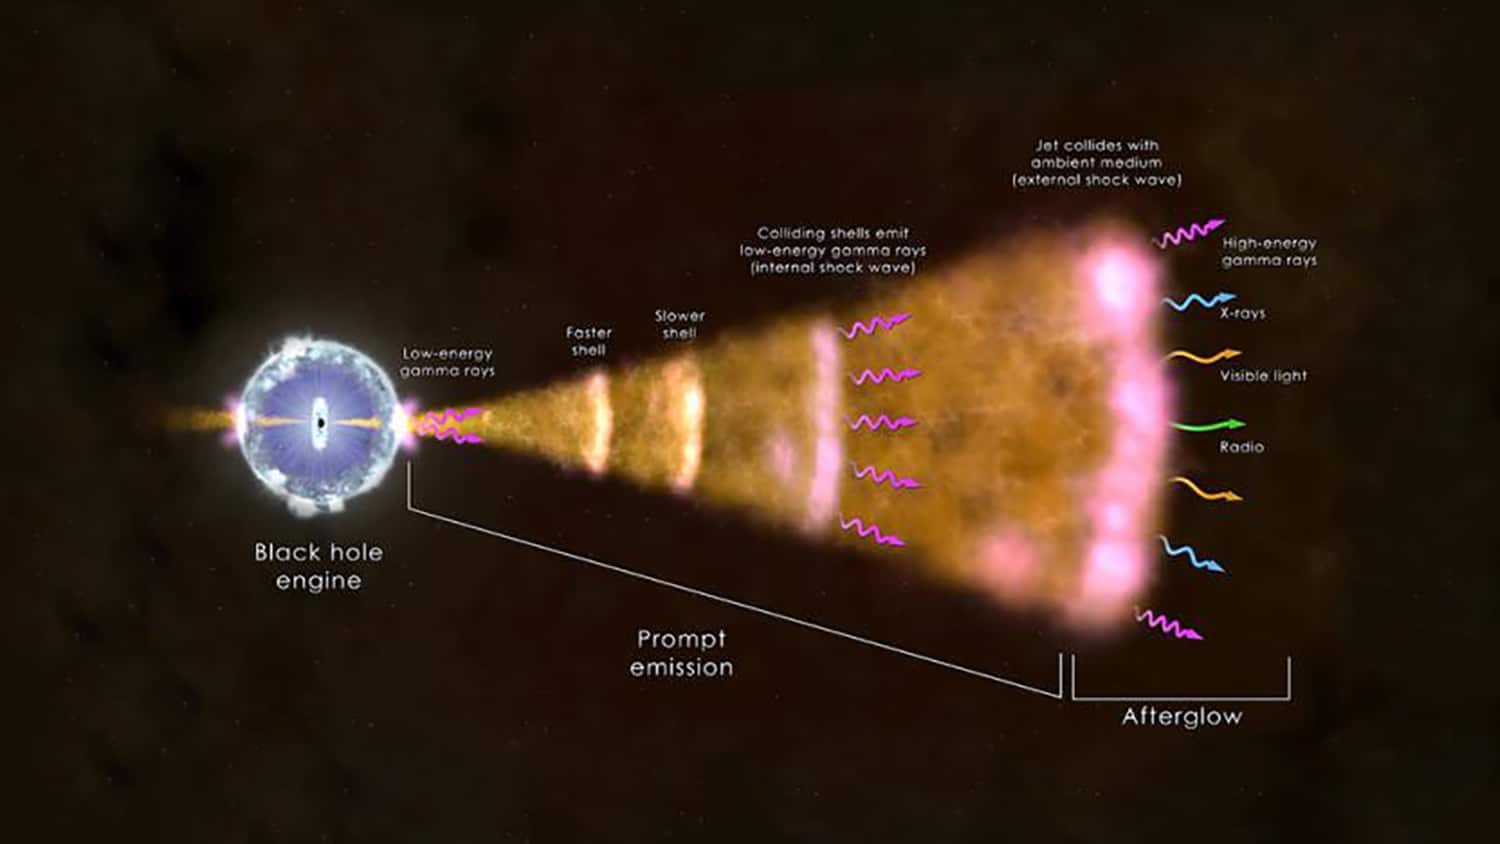 Brightest gamma-ray burst ever reveals new mysteries of cosmic explosions thumbnail